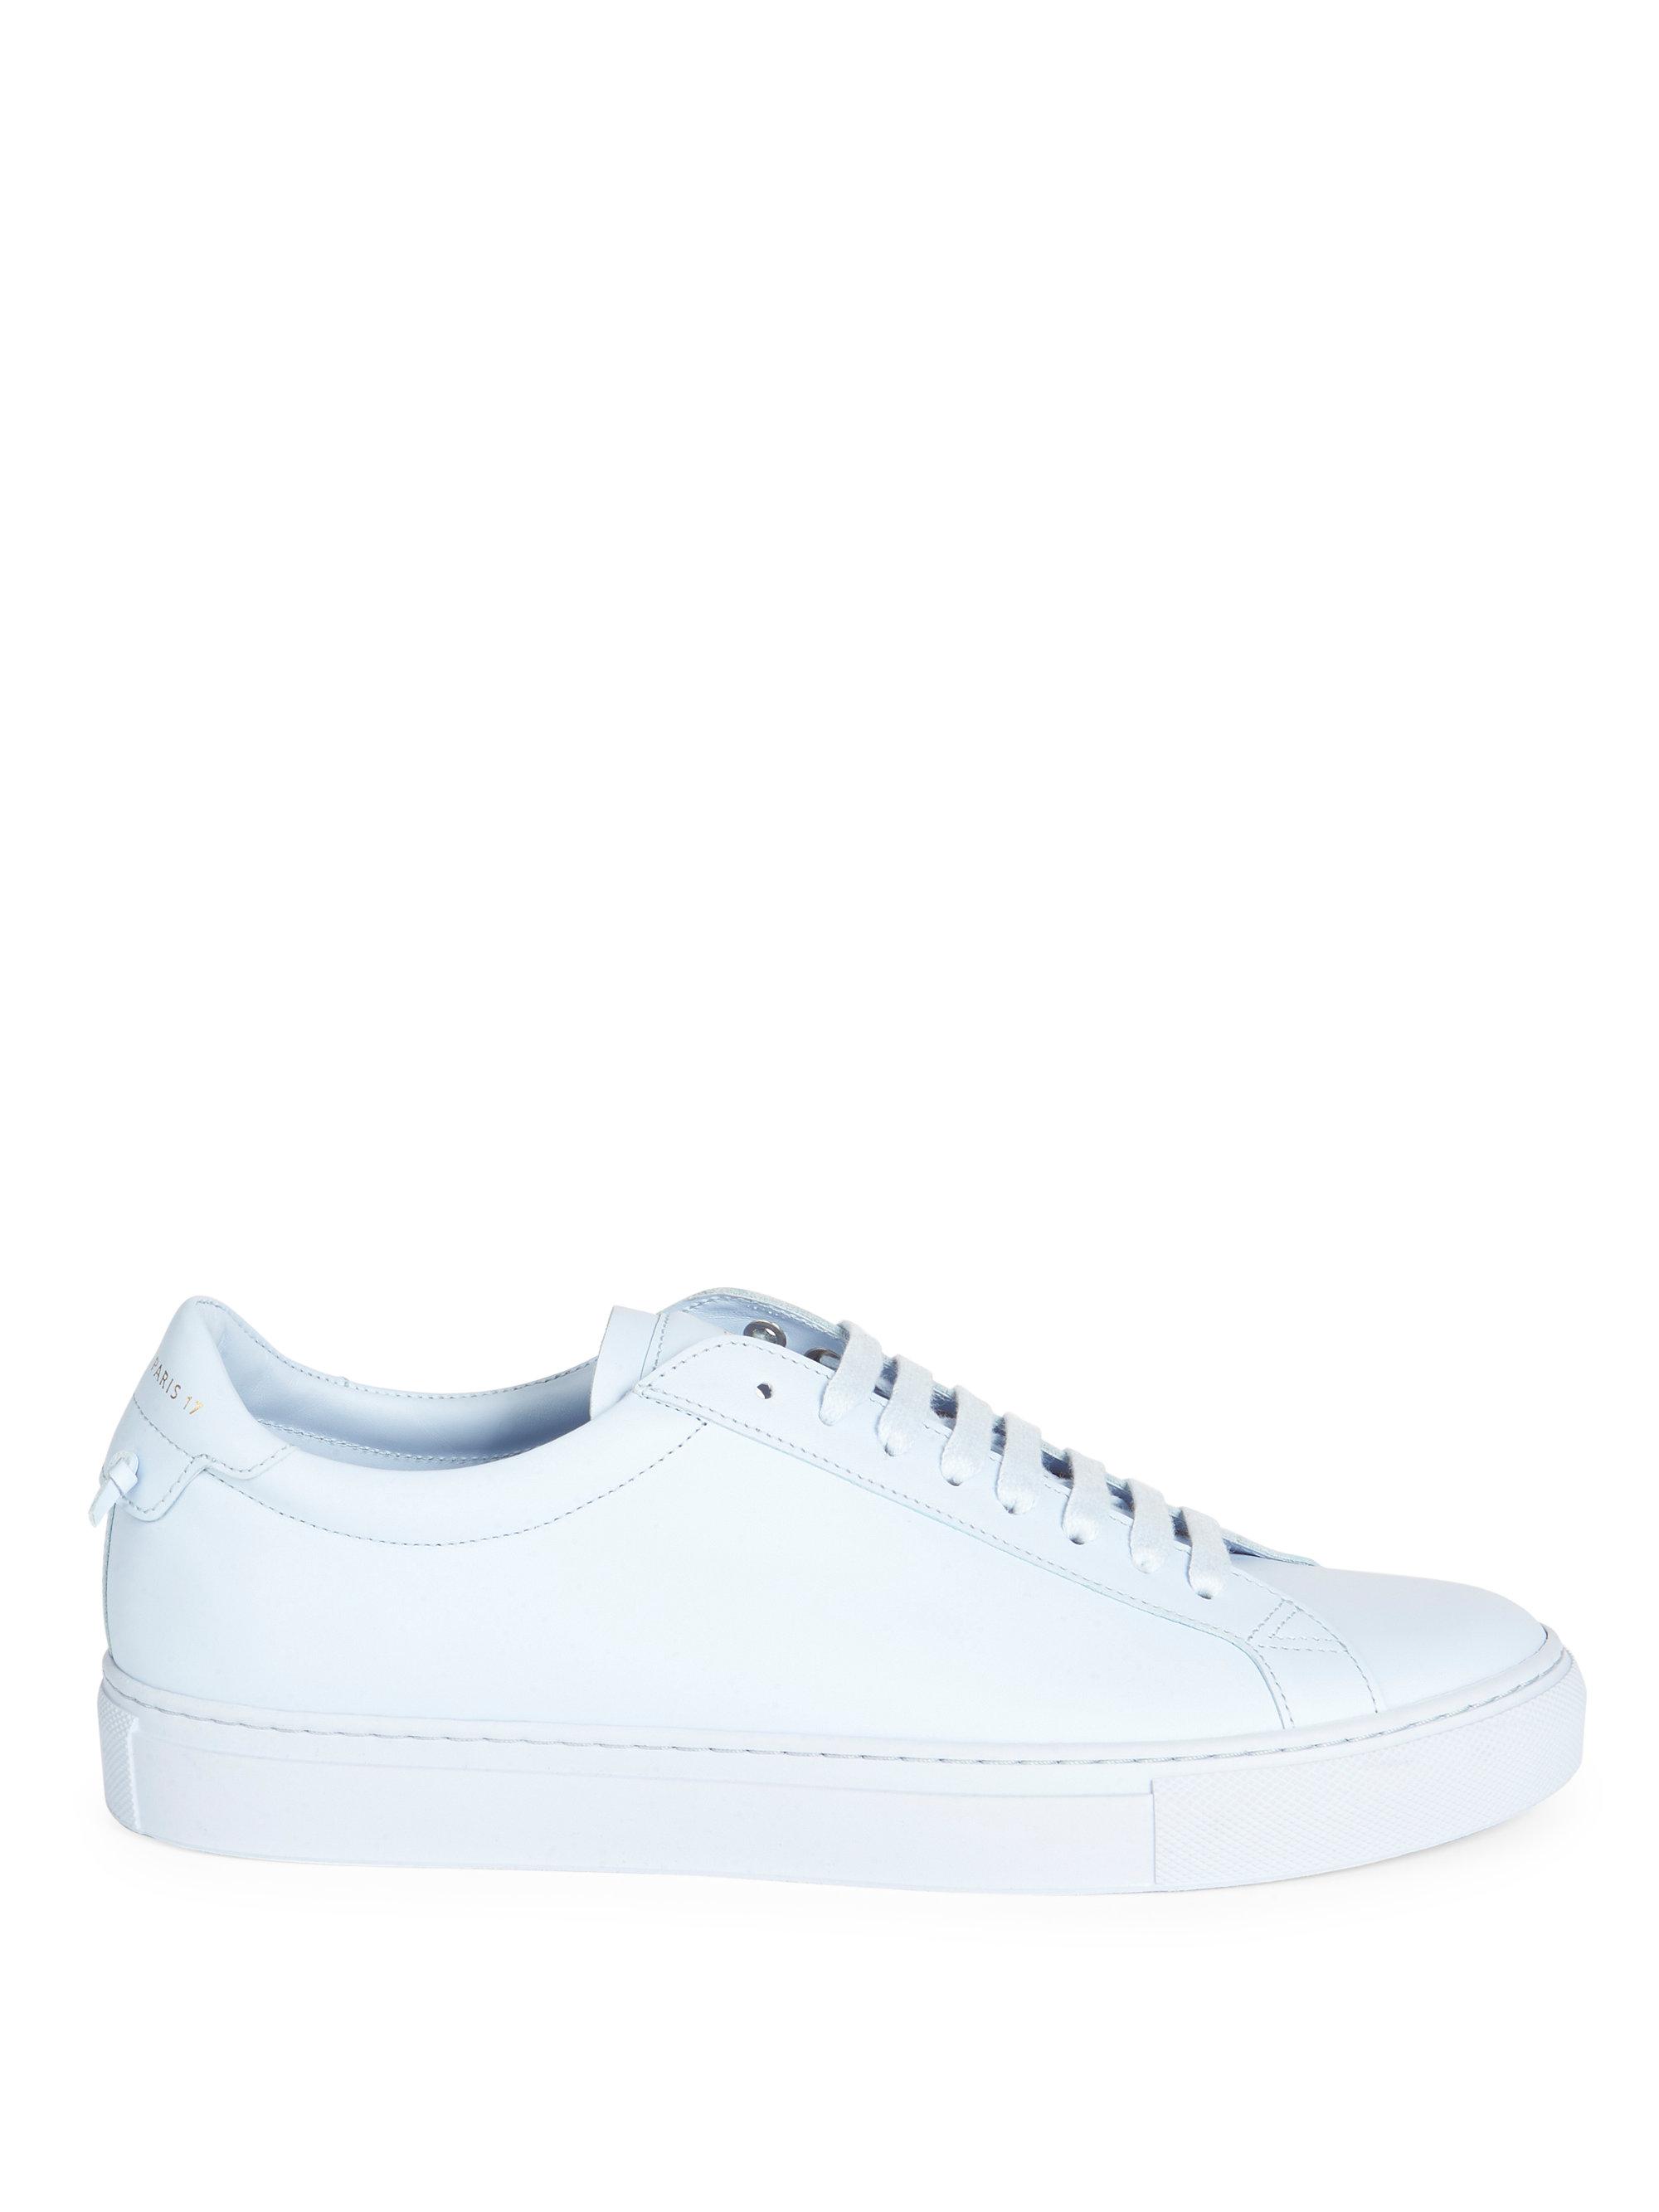 Lyst - Givenchy Urban Leather Low-top Sneakers in Blue